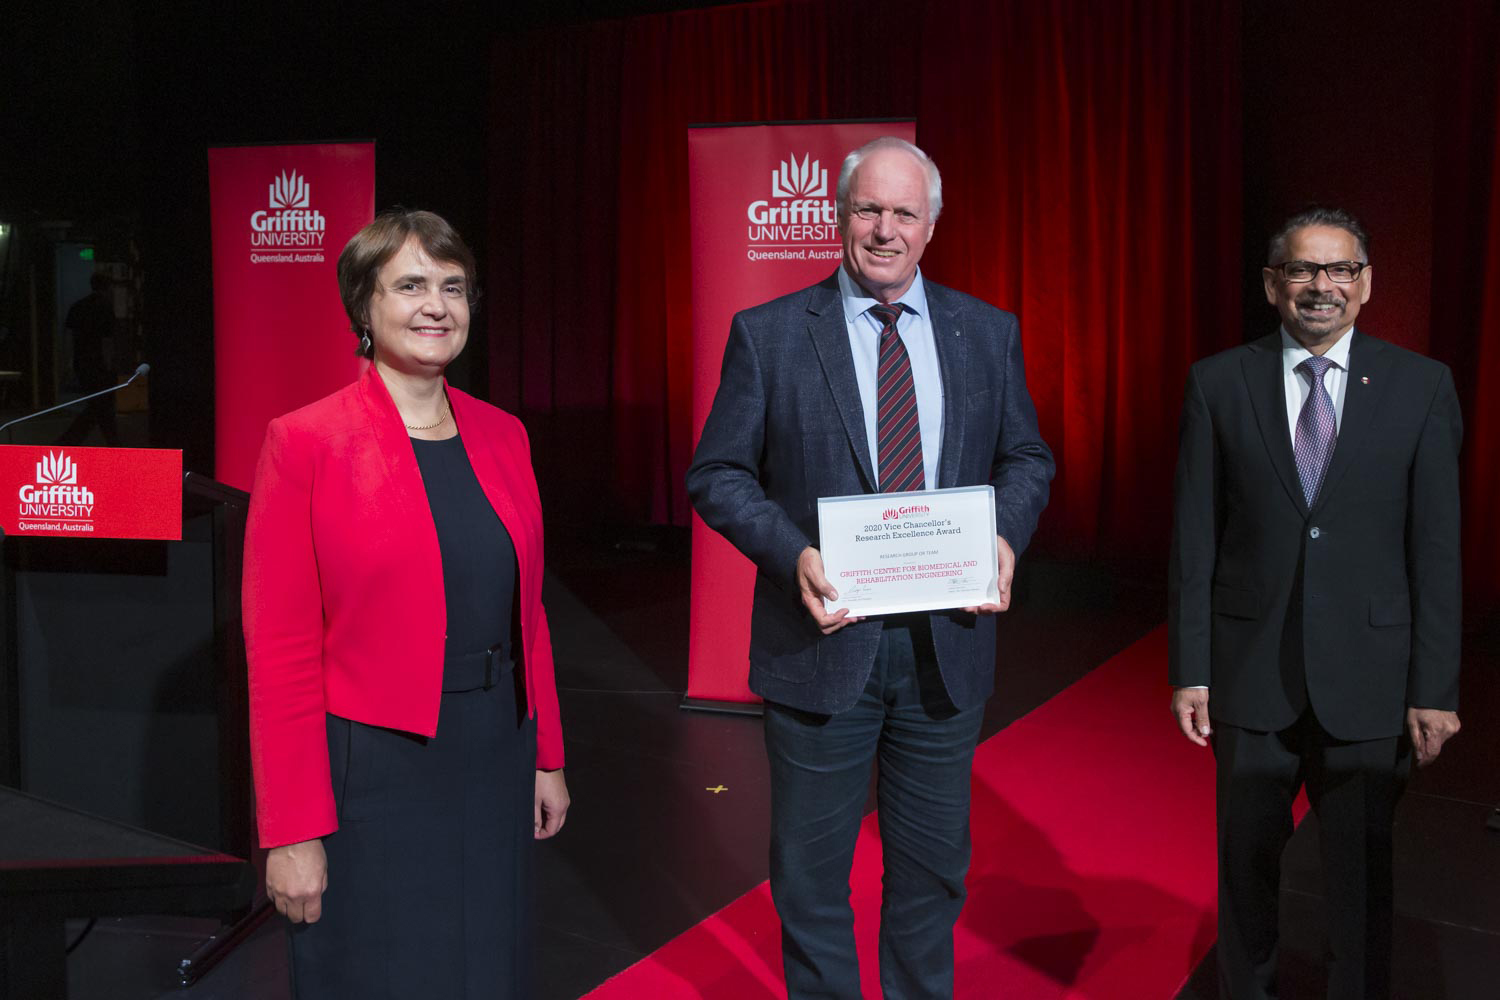 Professor David Lloyd accepts the Research Excellence Award for the Griffith Centre for Biomedical and Rehabilitation Engineering Menzies Health Institute Queensland from Vice Chancellor and President Professor Carolyn Evans and Deputy Vice Chancellor (Research) Professor Mario Pinto.